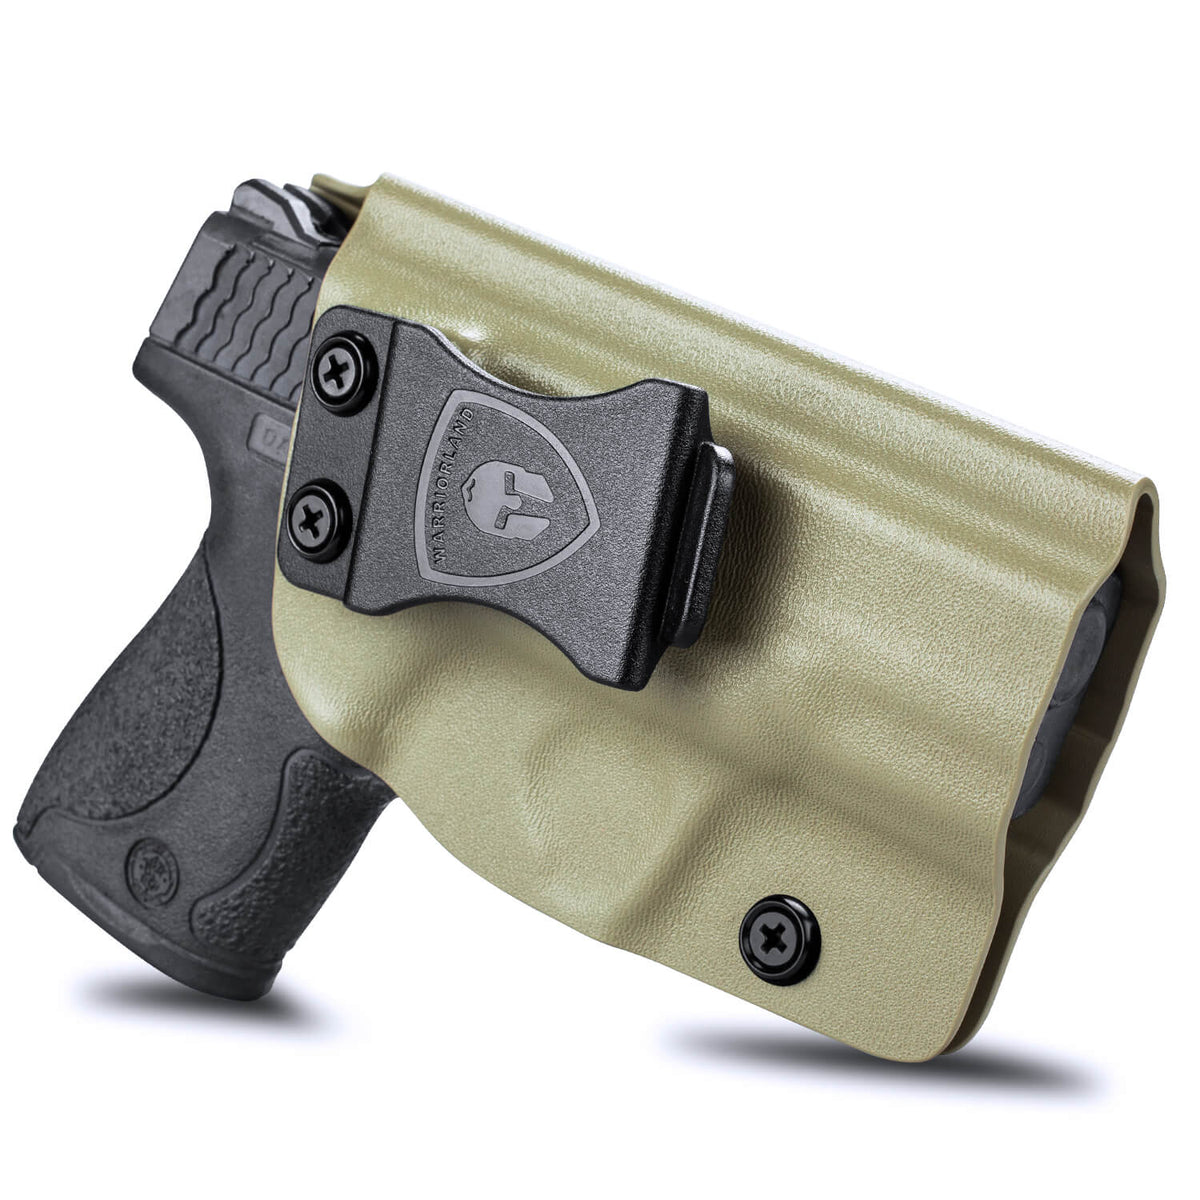 Tan Smith & Wesson Kydex IWB Holster M&P Shield Plus M2.0  M1.0  9mm/.40 Pistol Right/ Left Handed